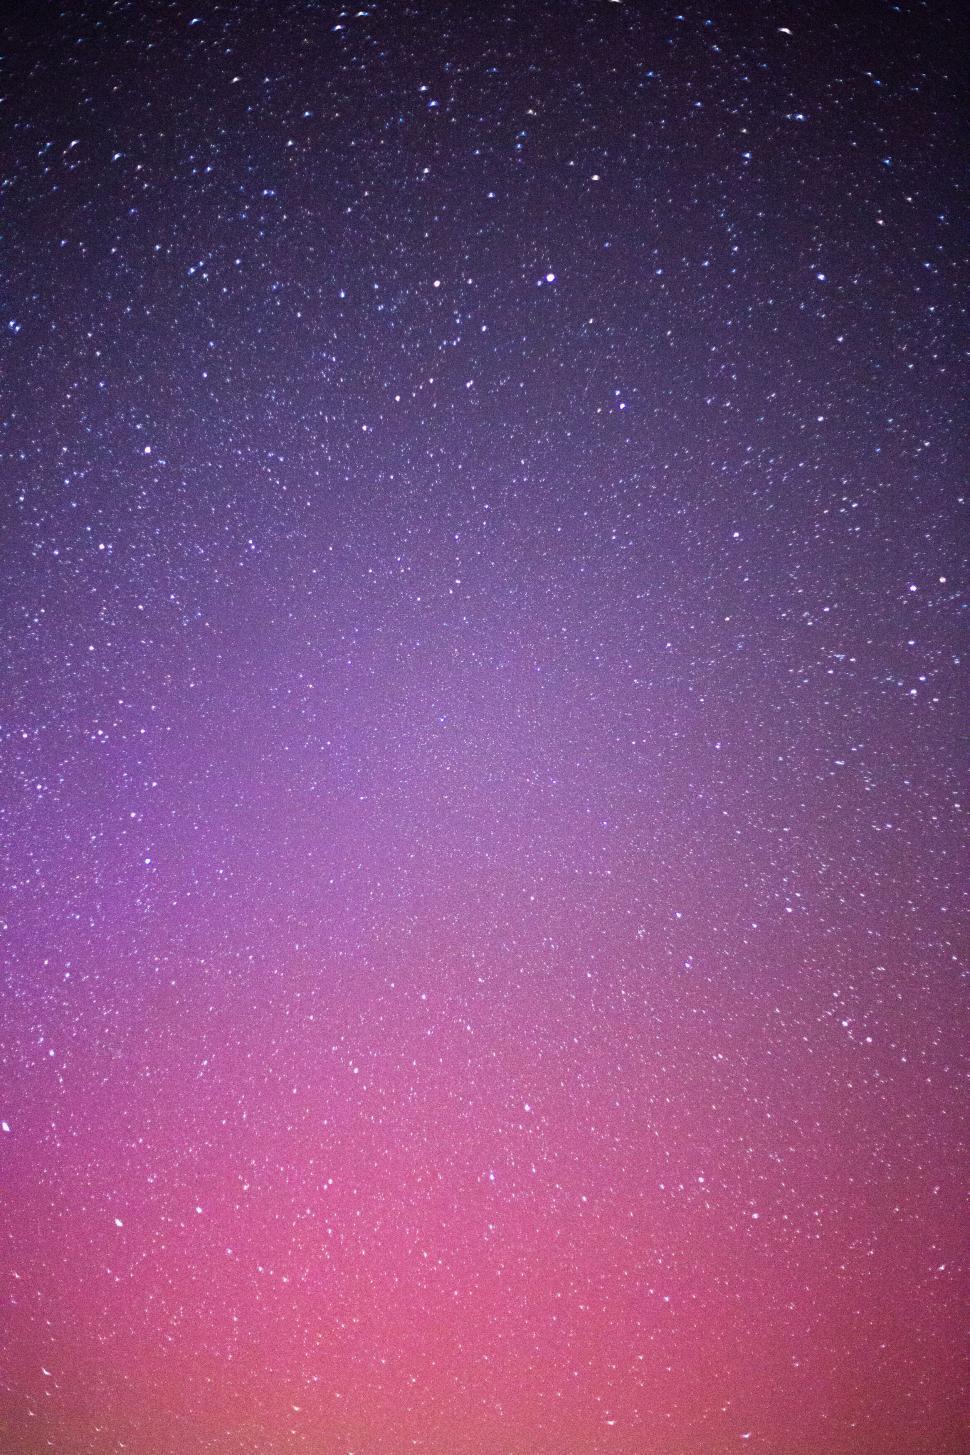 Free Image of Starry Sky with Pink and Purple Hues 